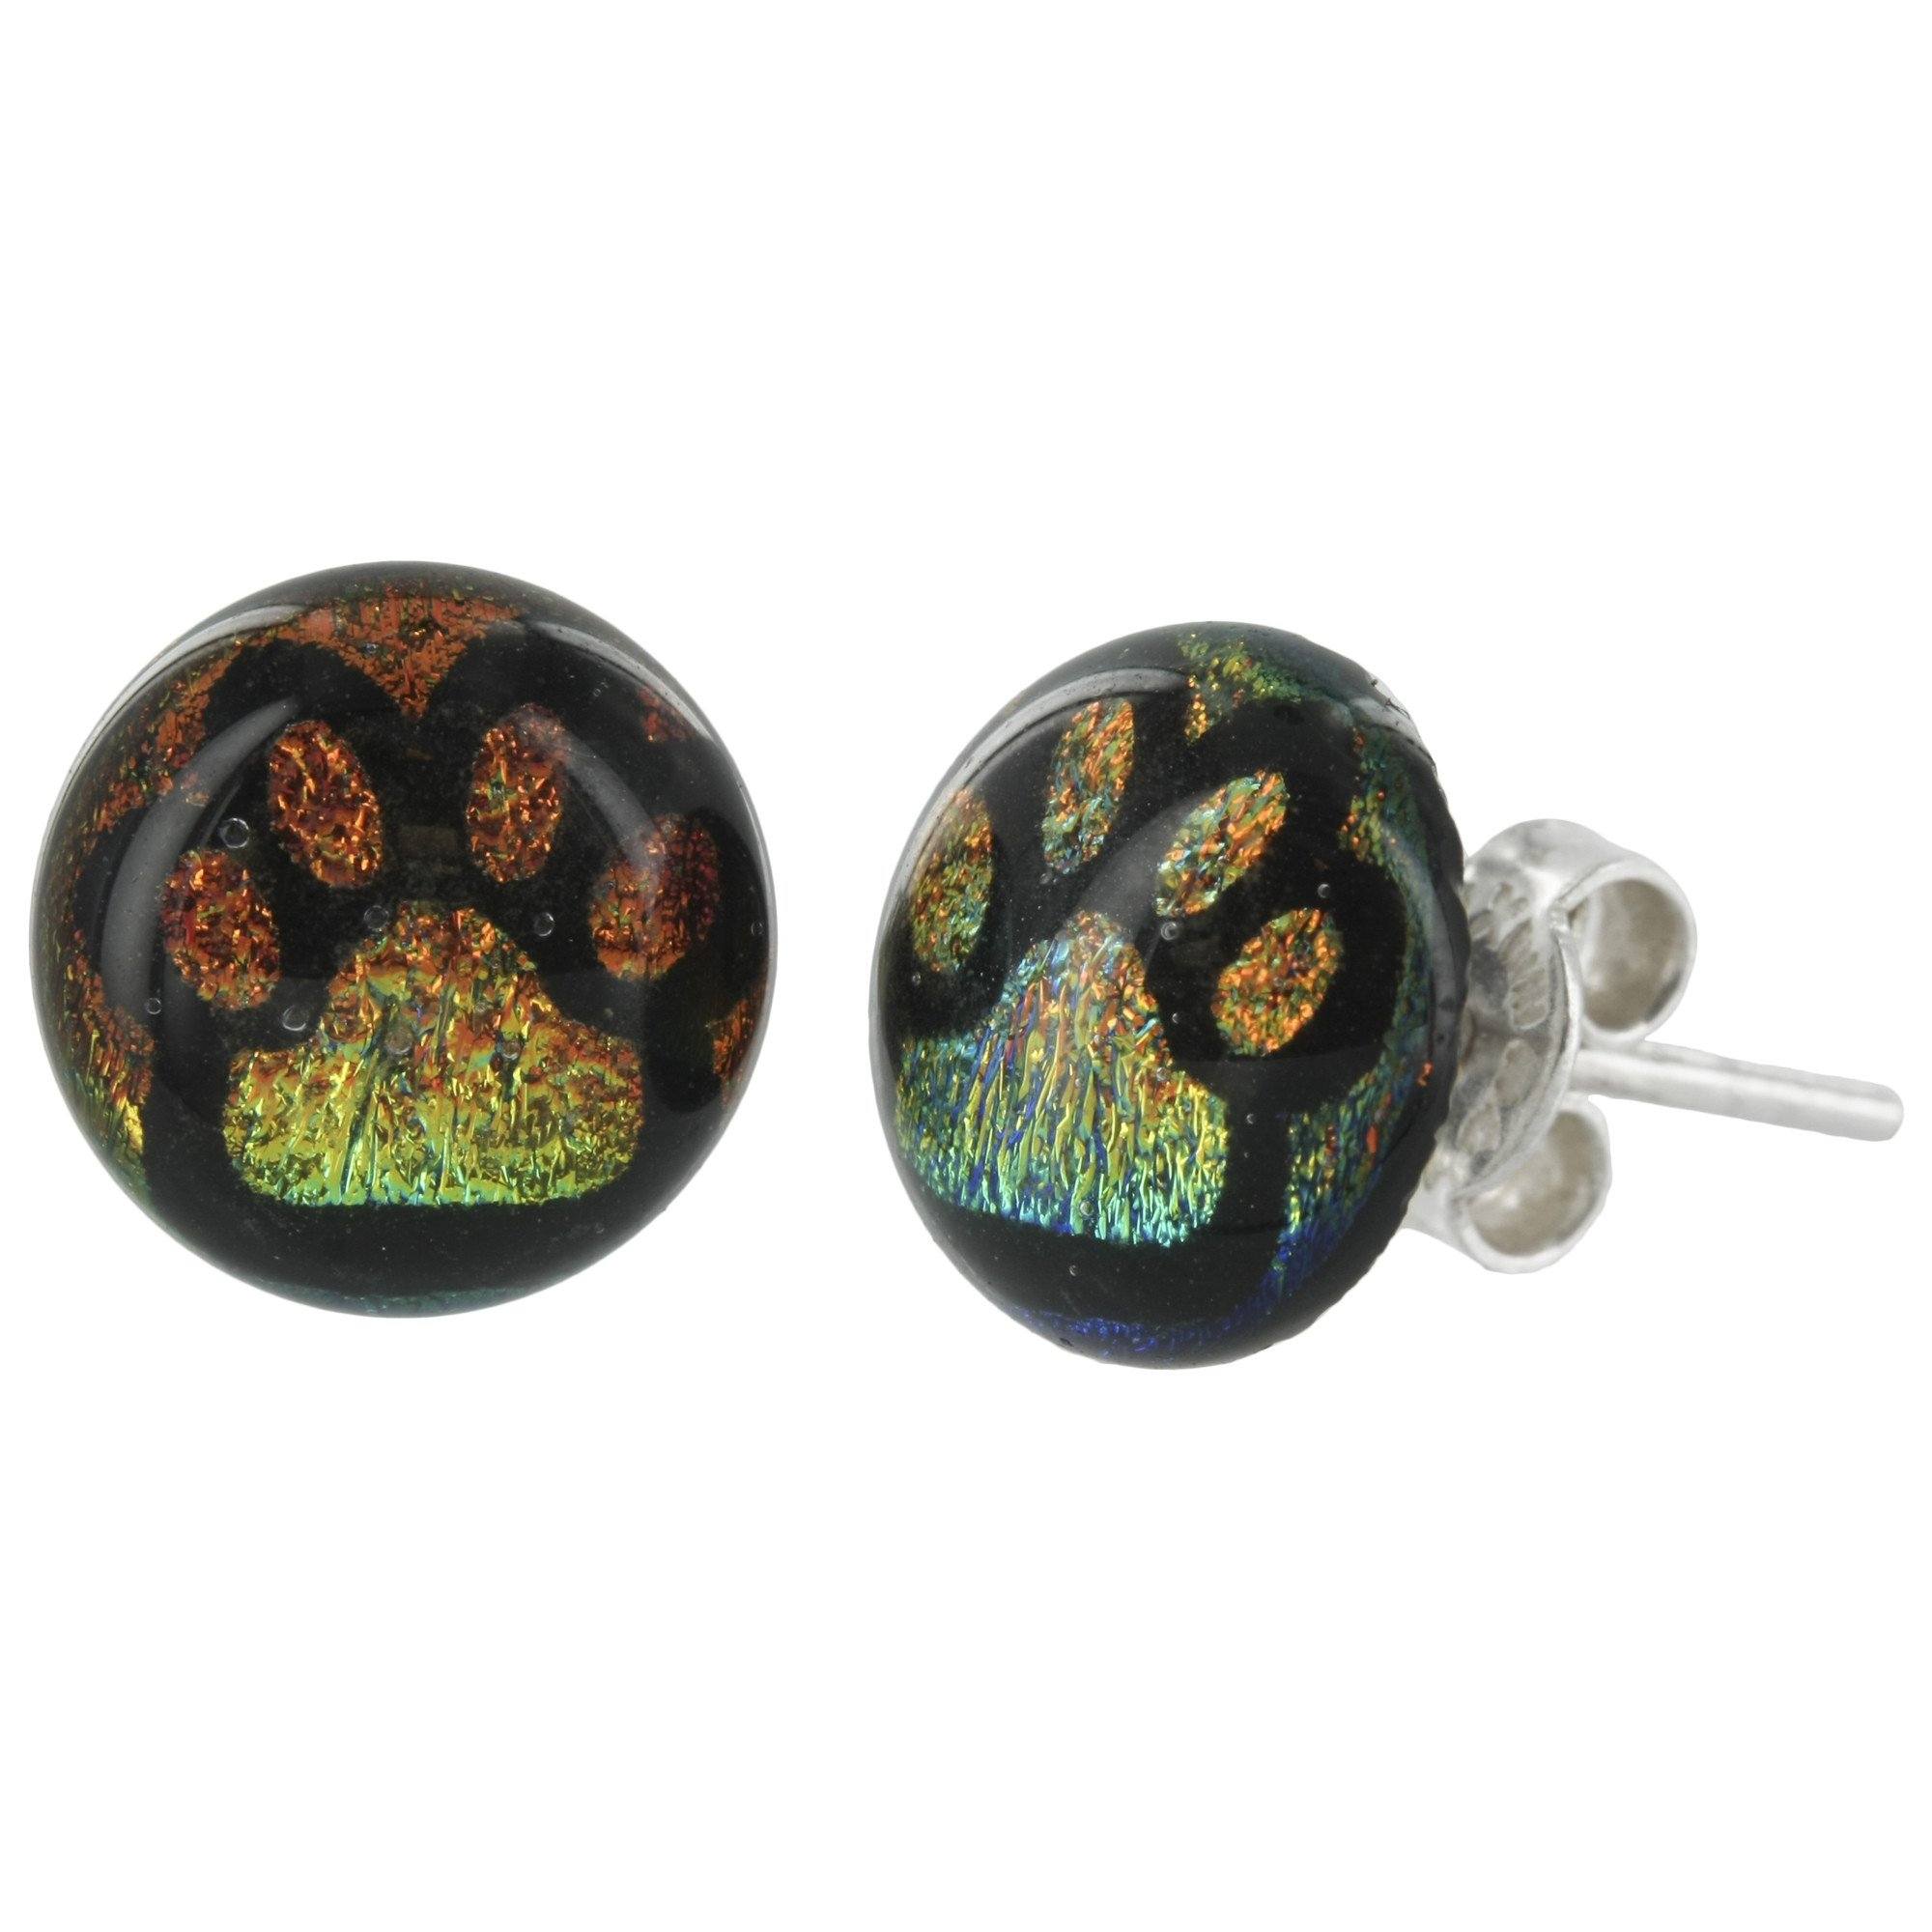 Paw Print Dichroic Glass Earrings - Multicolor